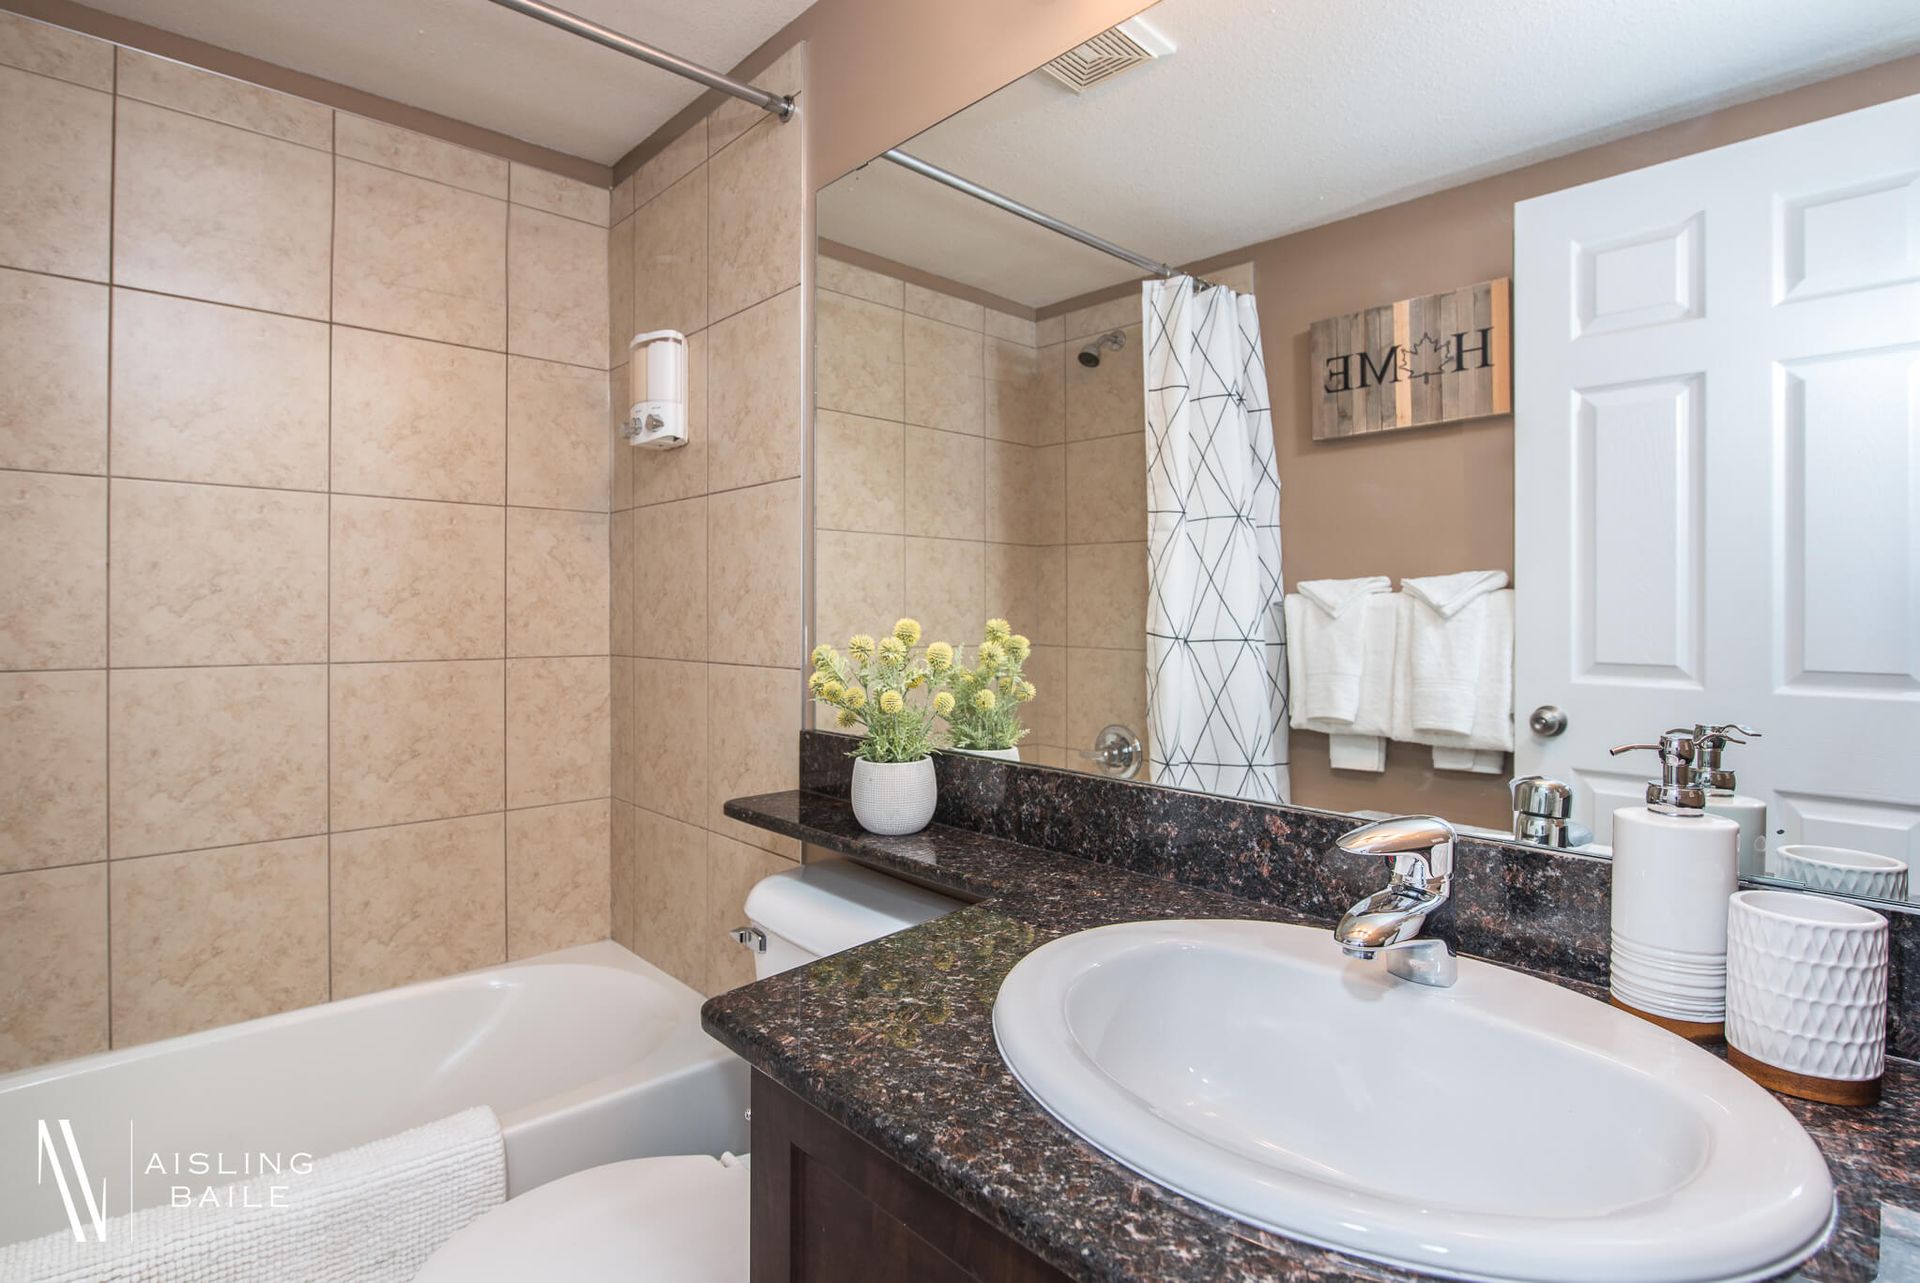 Private ensuite full bath at the Stylish condo of Lake Windermere Pointe in Invermere, a BC Vacation Rental hosted by Aisling Baile Property Management.